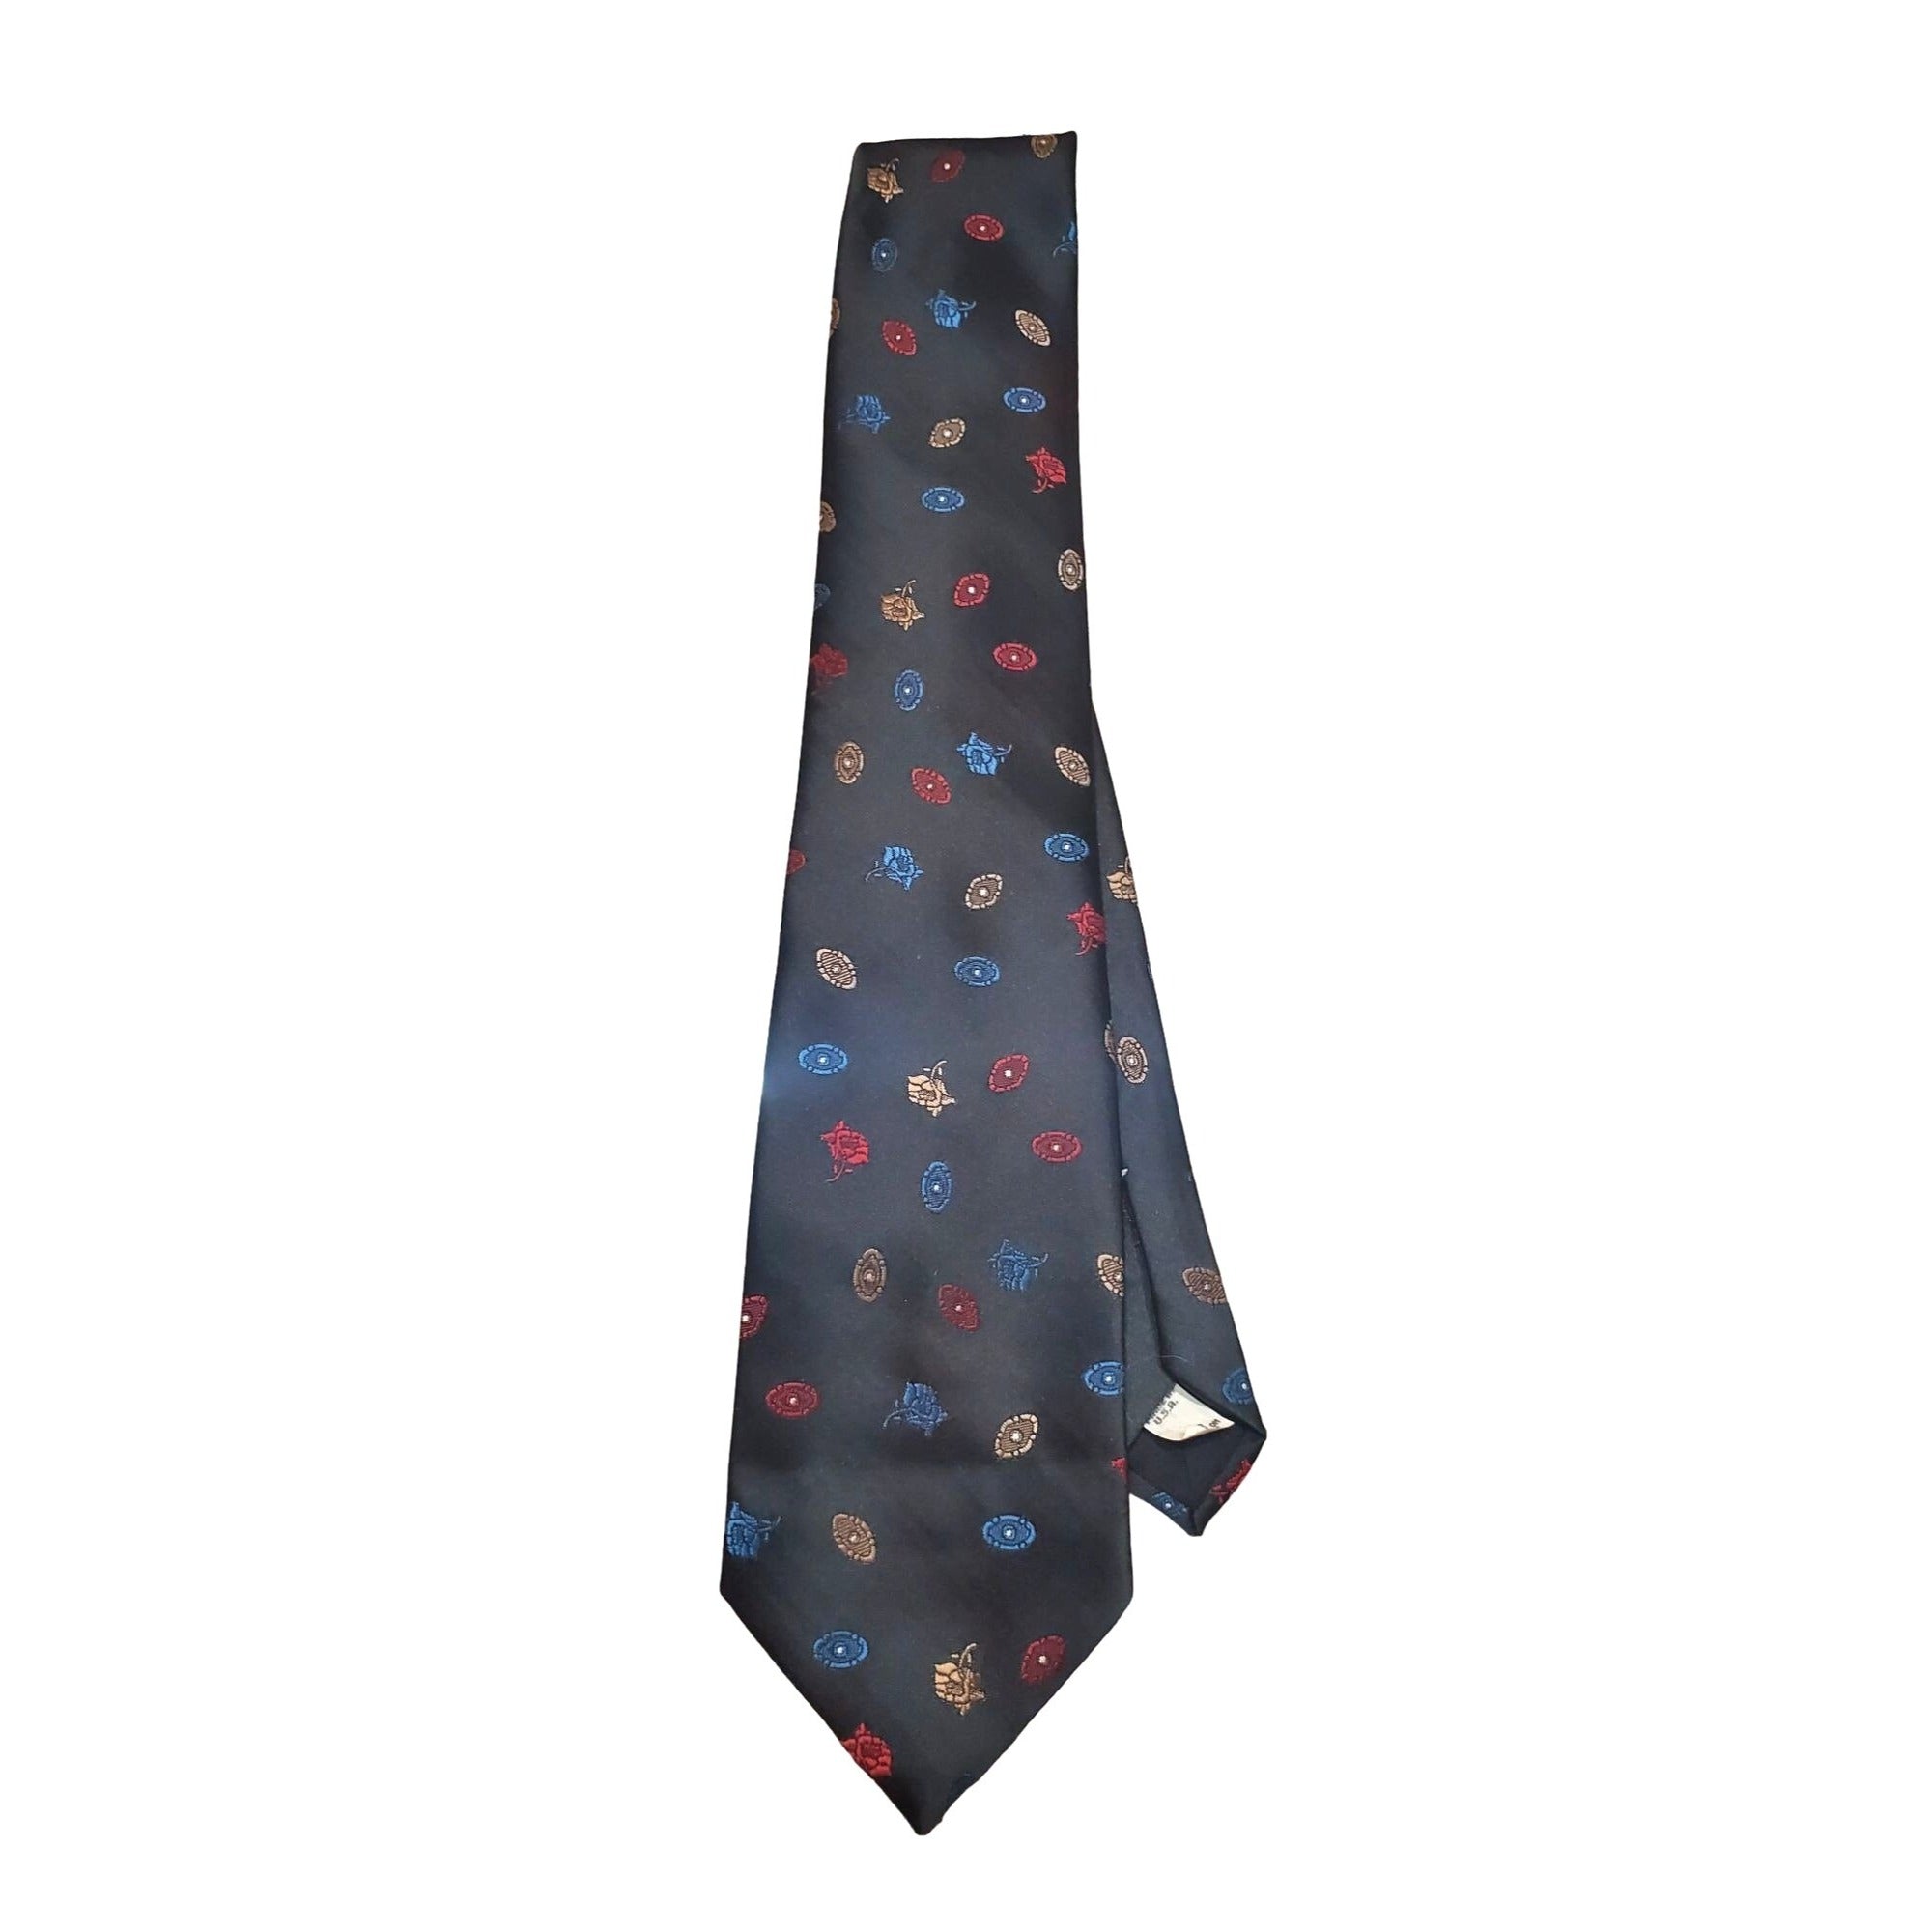 Golden House Black and Blue Men's Tie, 57 in. Long